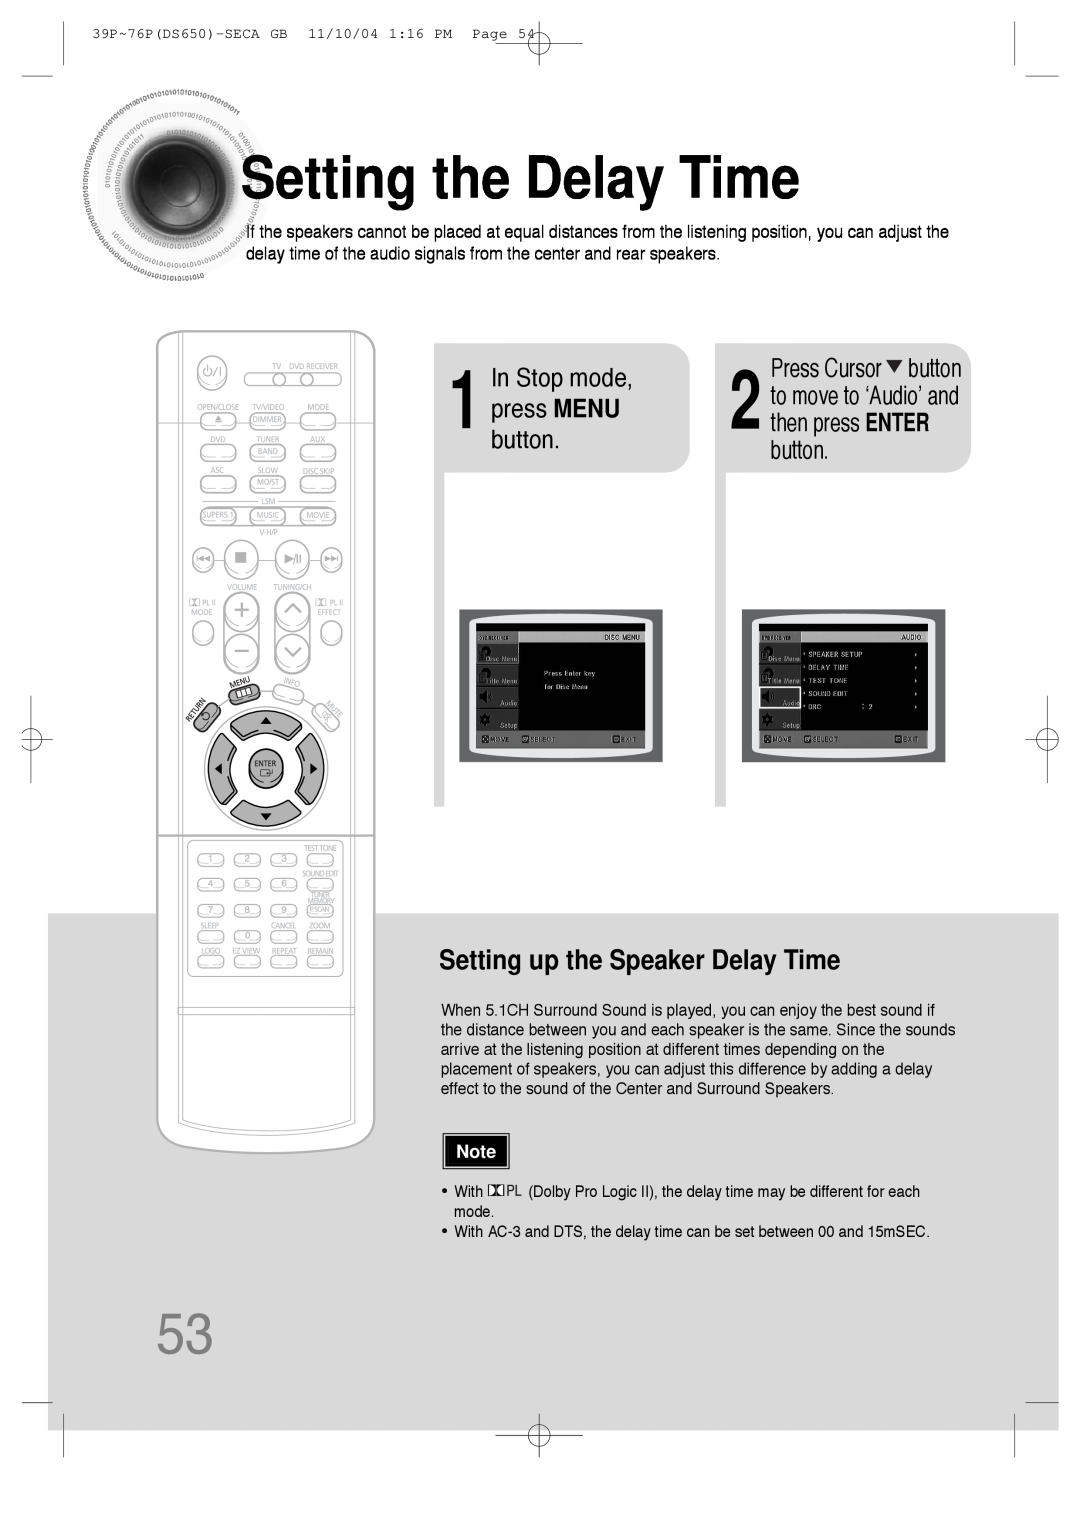 Samsung HT-DS650 instruction manual Settingthe Delay Time, Setting up the Speaker Delay Time, Press Cursor button 